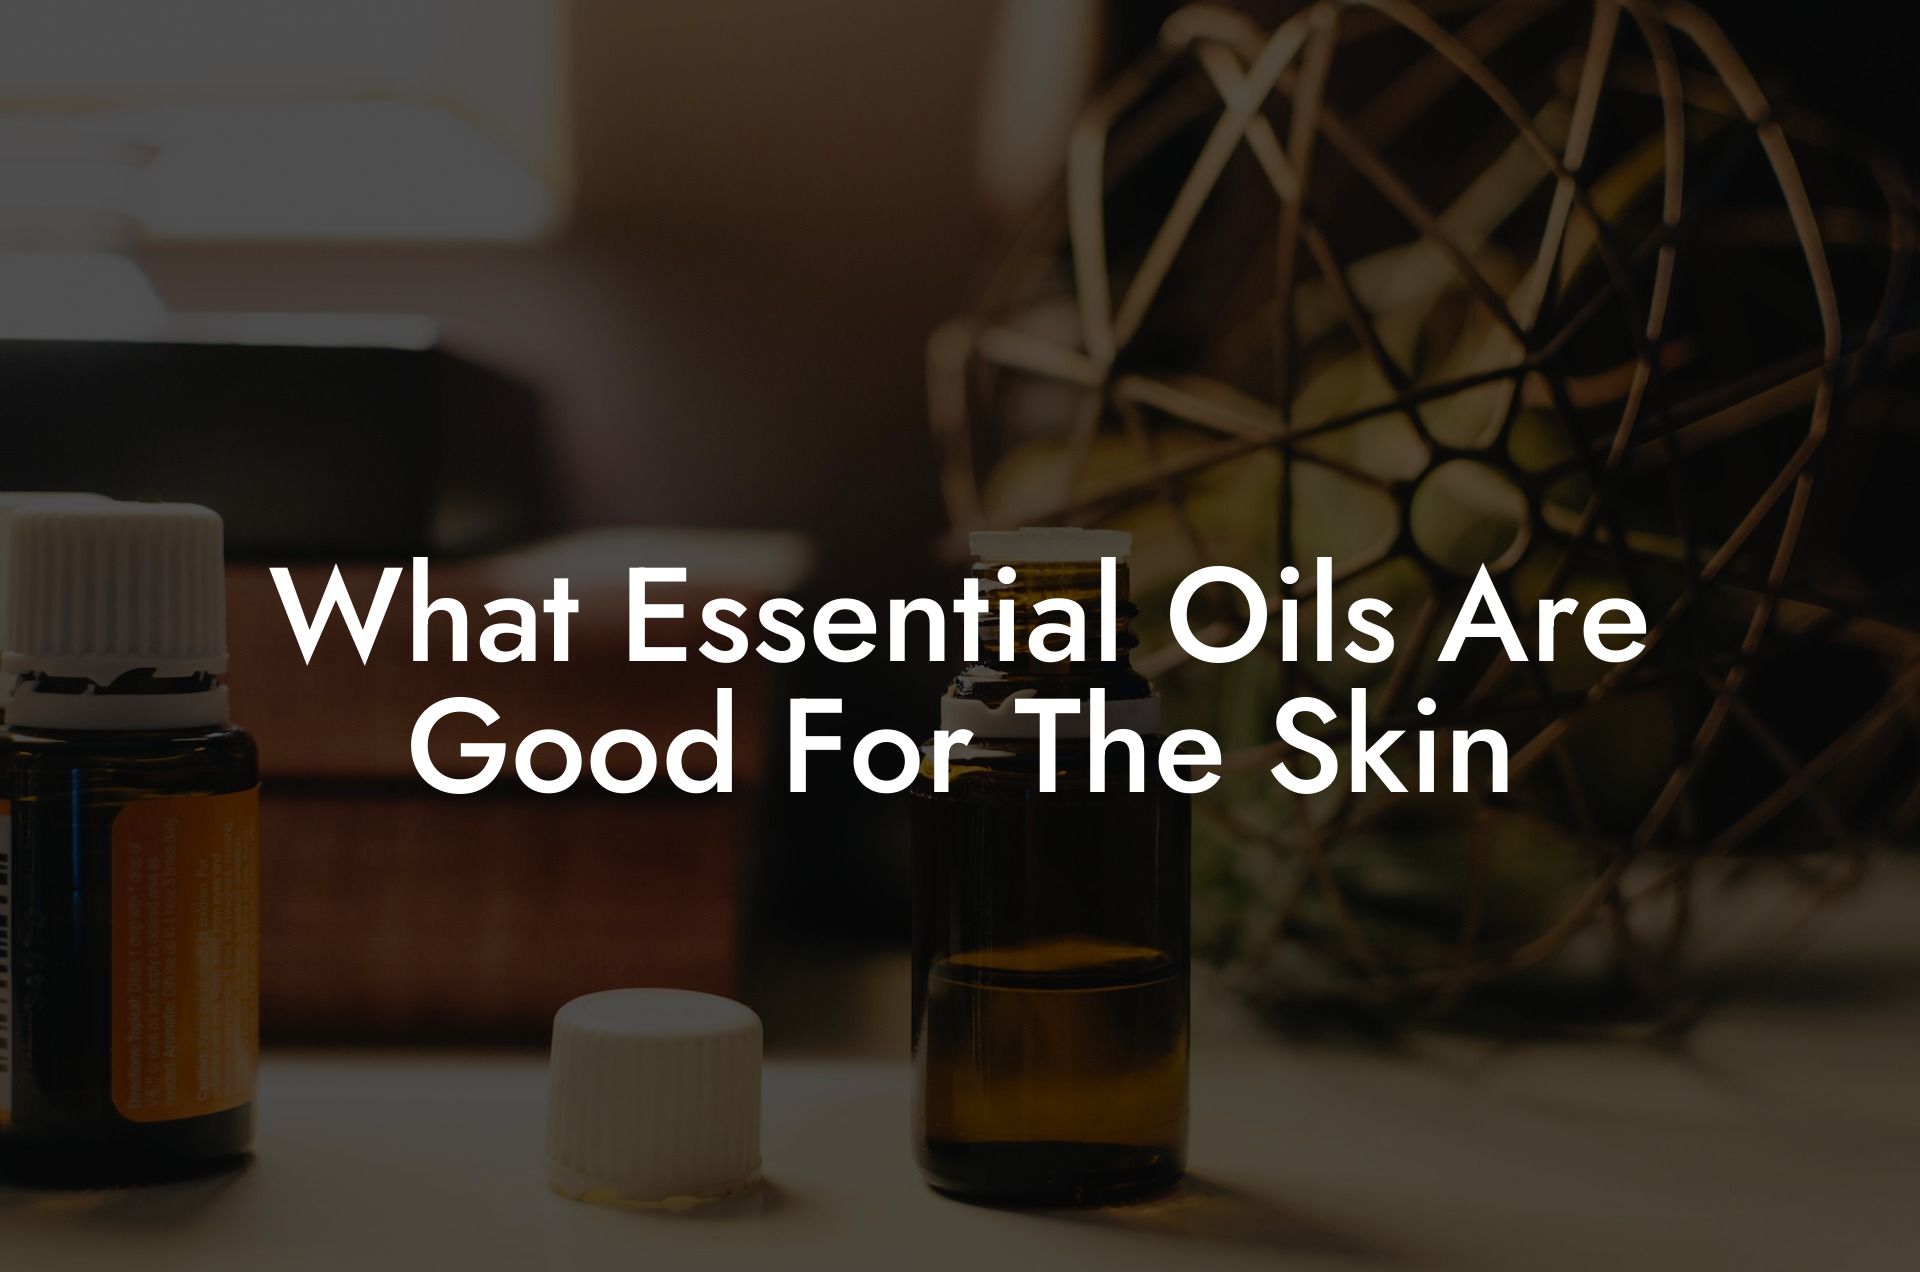 What Essential Oils Are Good For The Skin